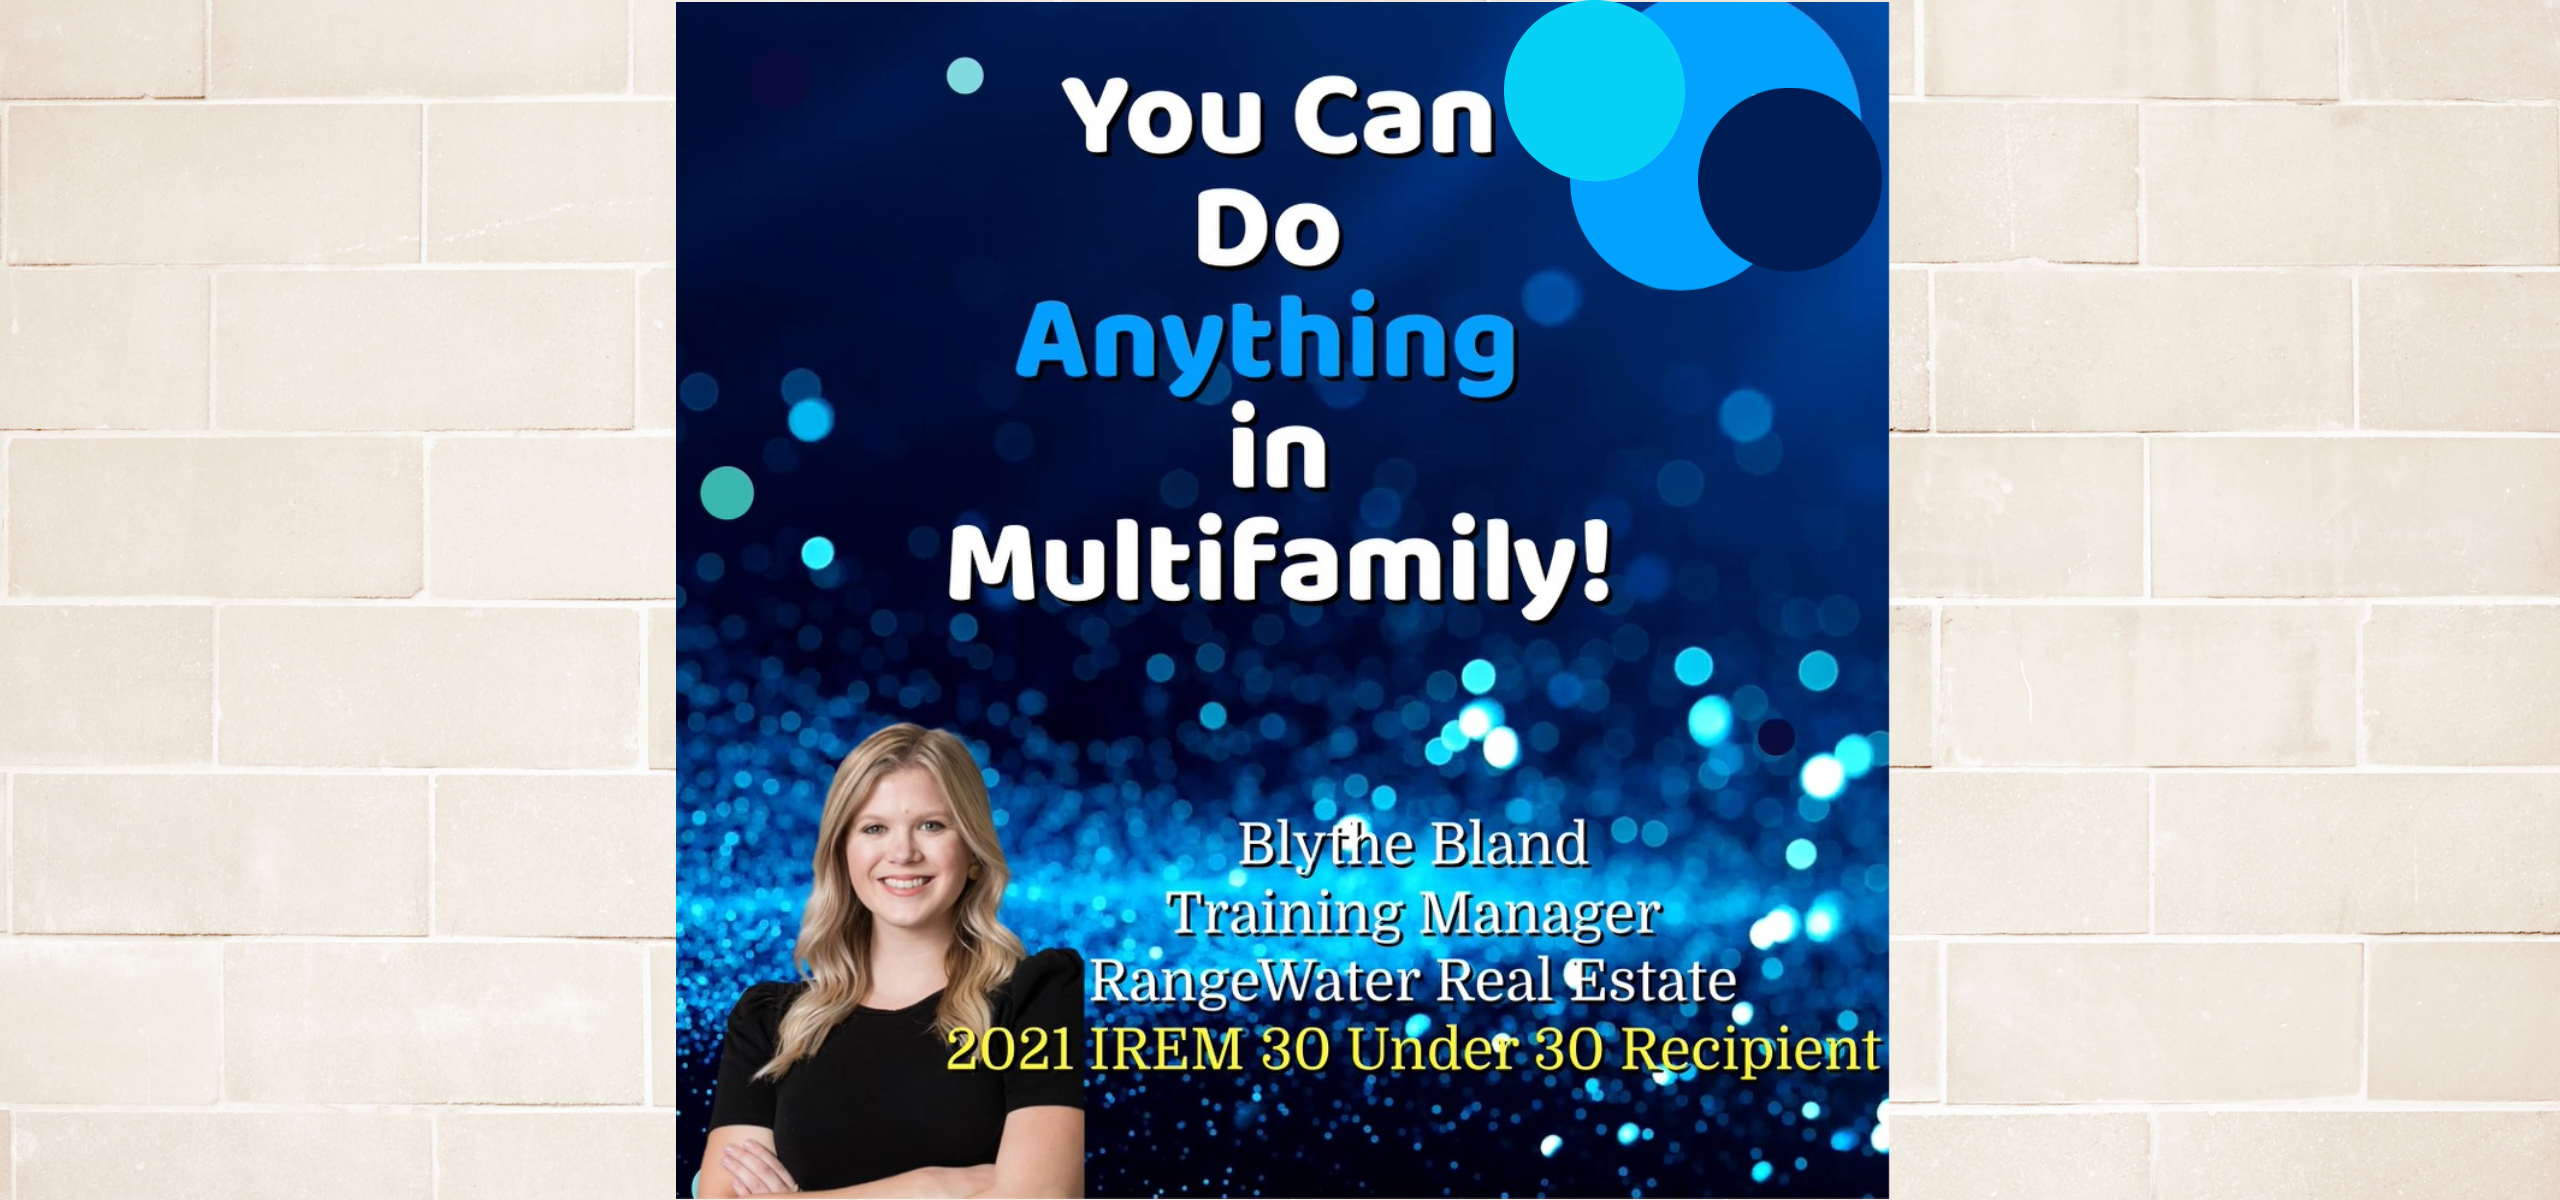 You Can Do Anything in Multifamily!